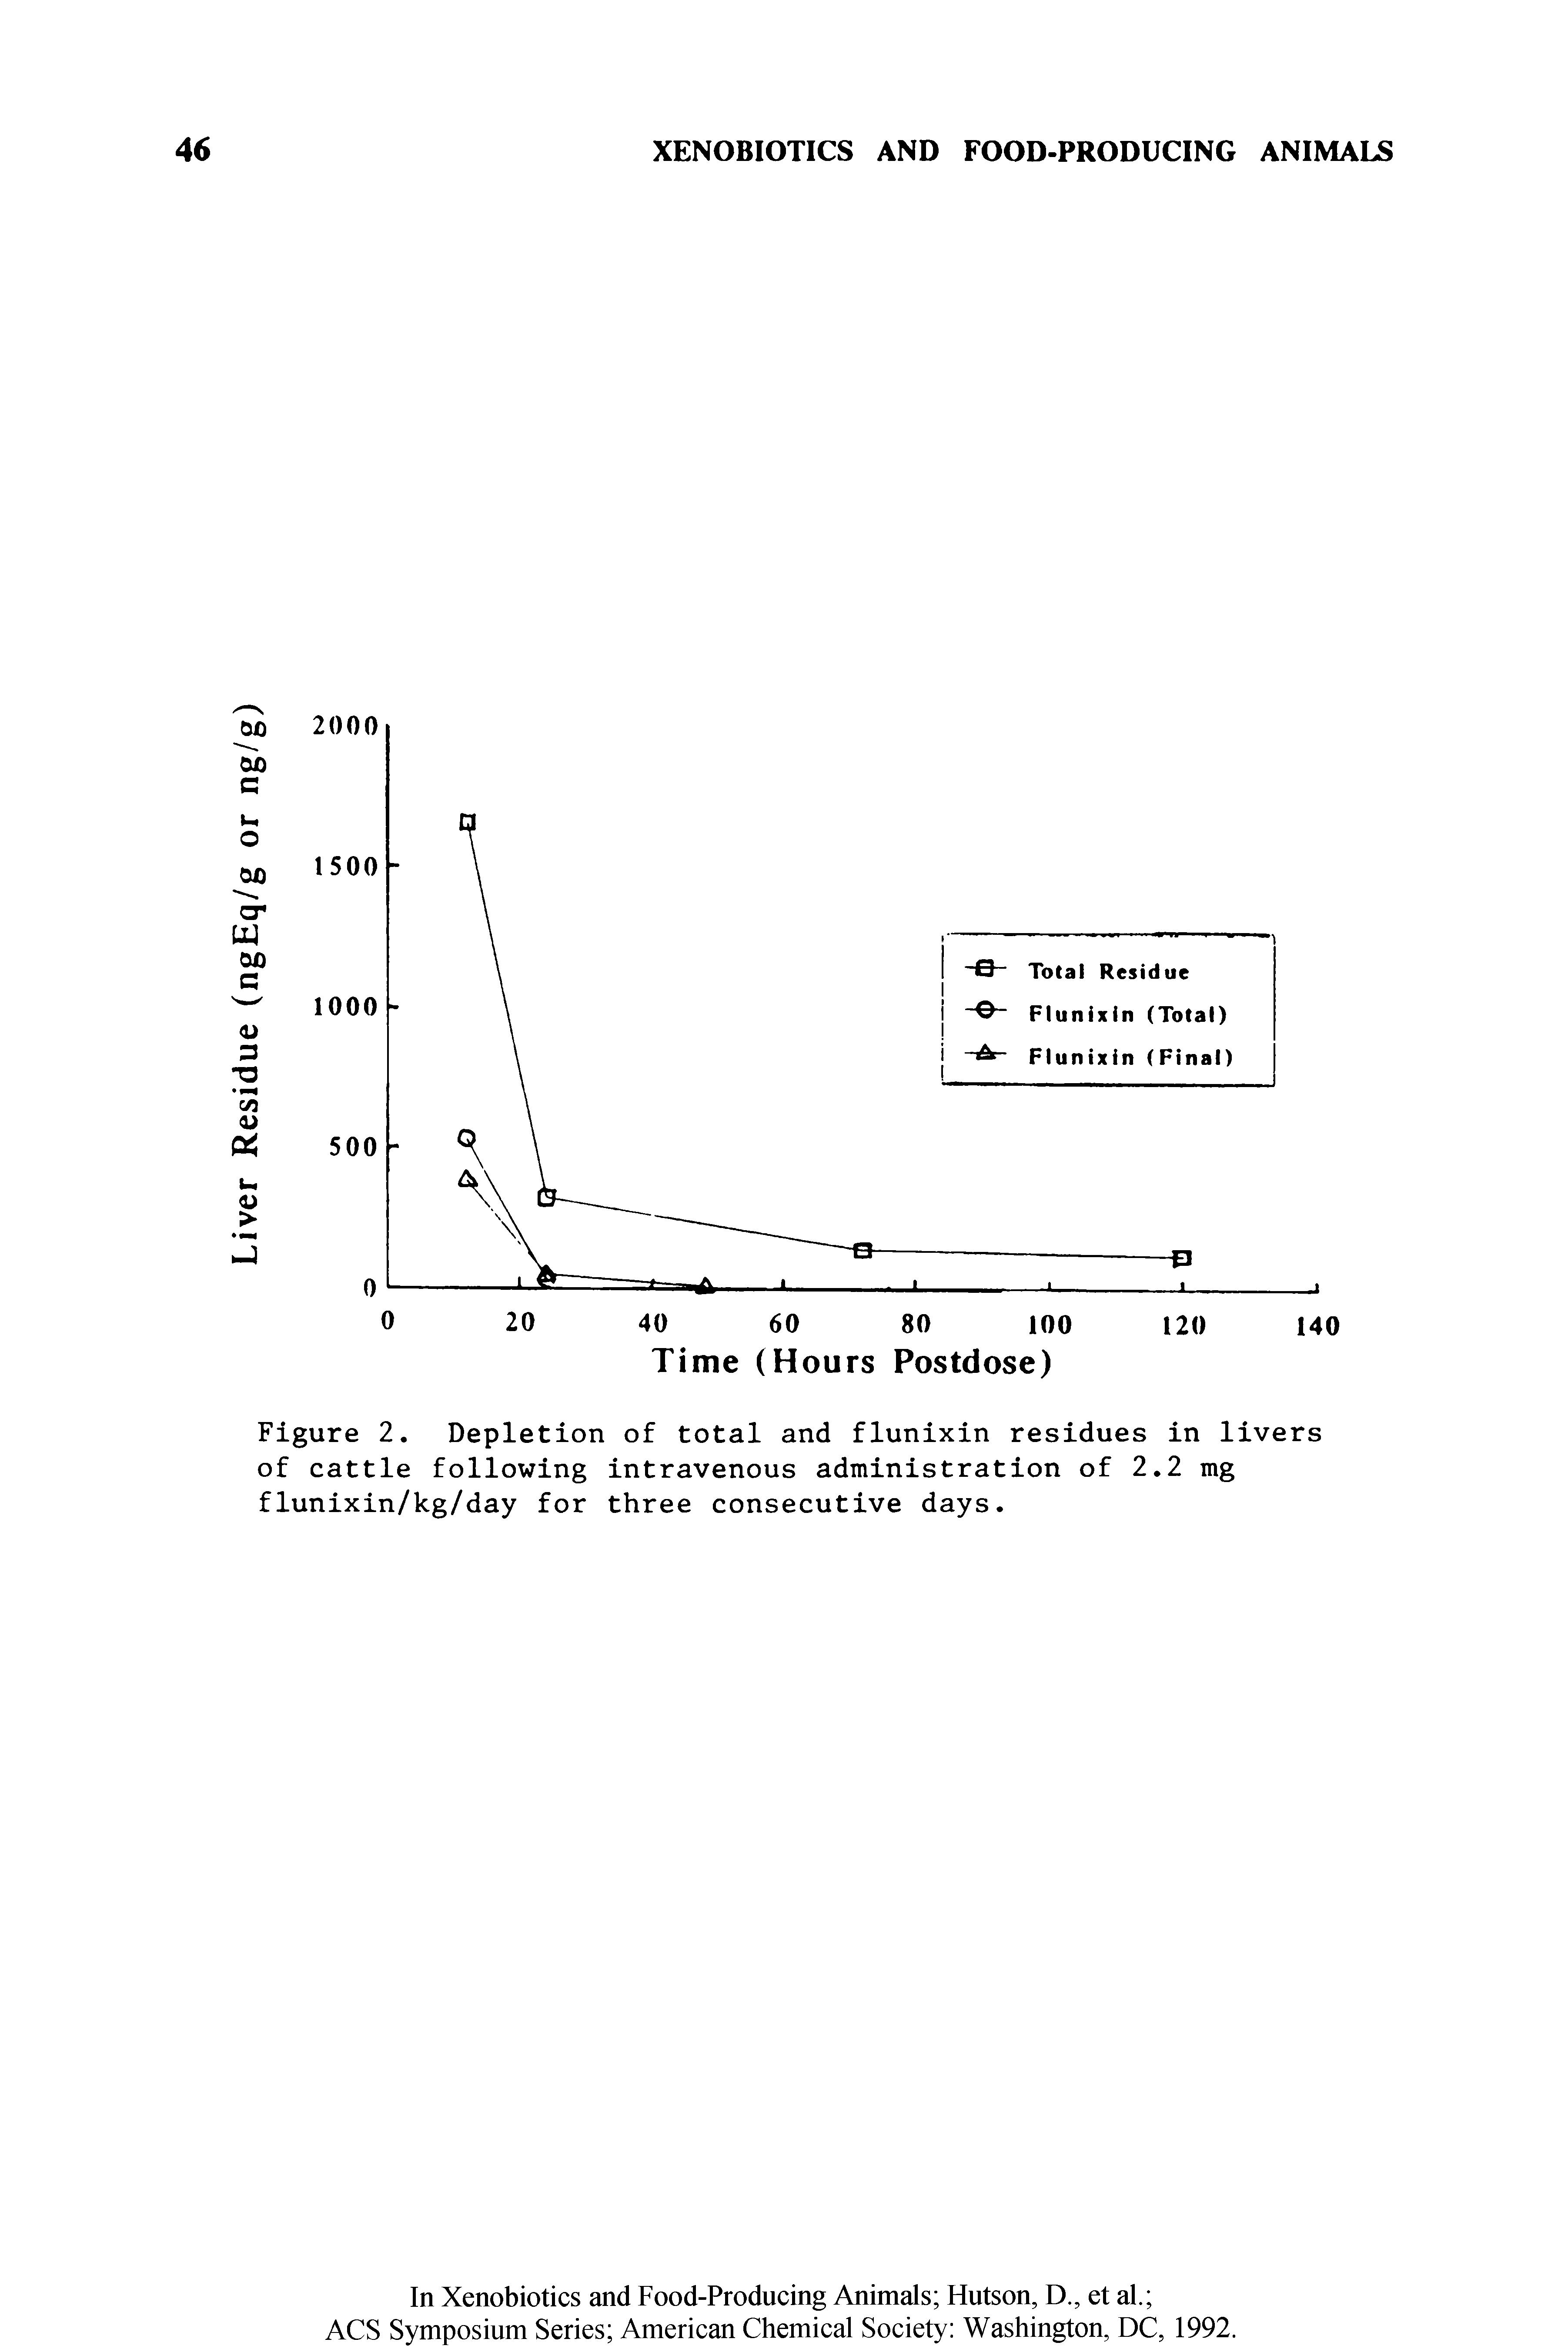 Figure 2. Depletion of total and flunixin residues in livers of cattle following intravenous administration of 2.2 mg flunixin/kg/day for three consecutive days.